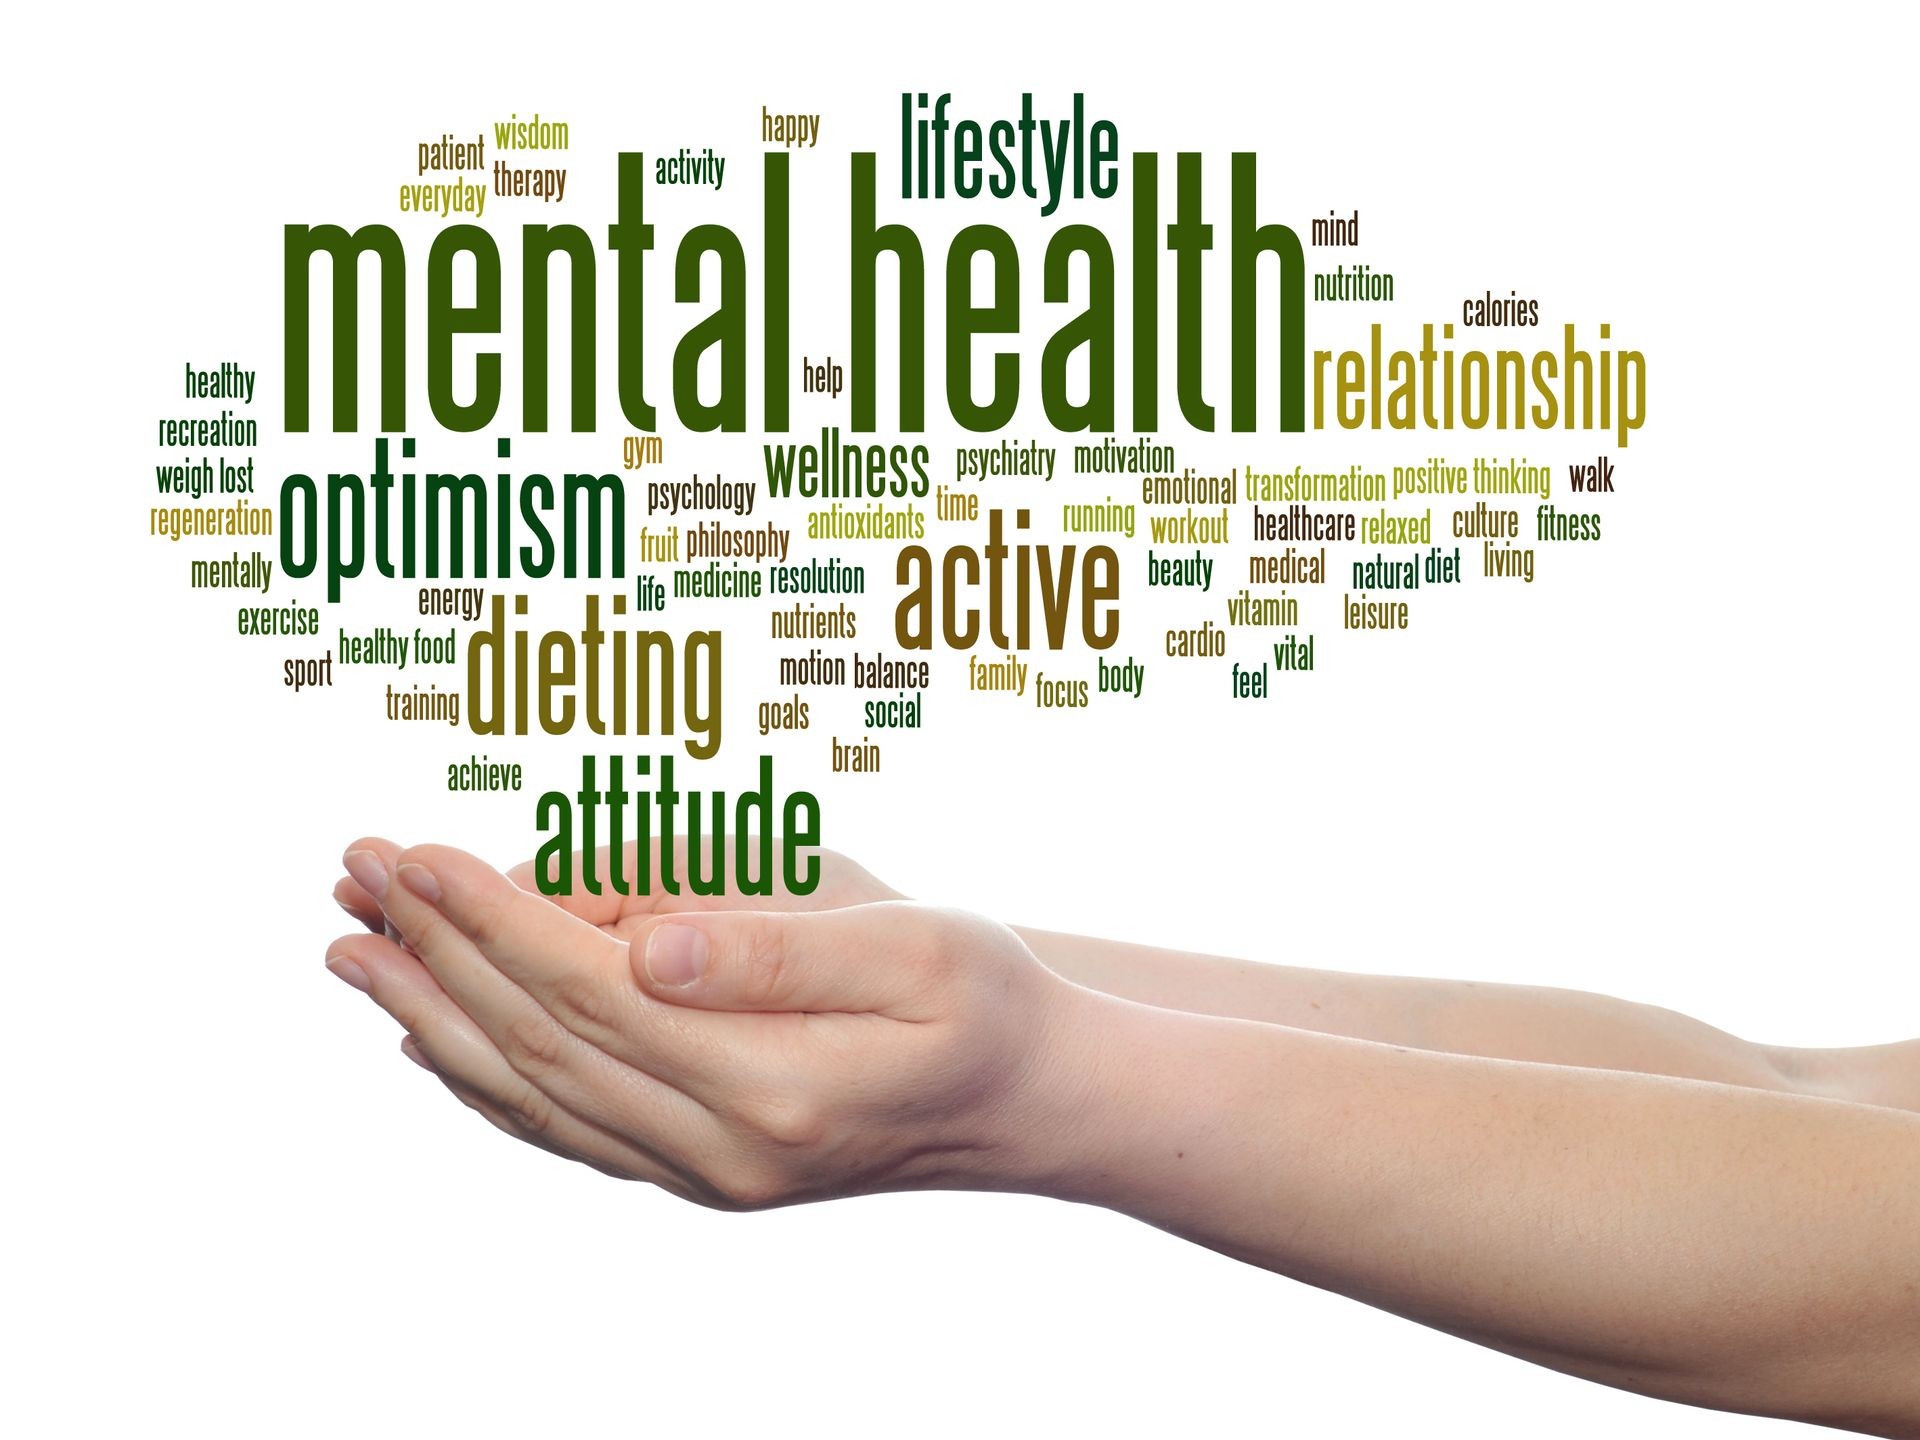 Concept conceptual mental health or positive thinking abstract word cloud in hands isolated on background, metaphor to optimism, psychology, mind, healthcare, thinking, attitude, balance or motivation